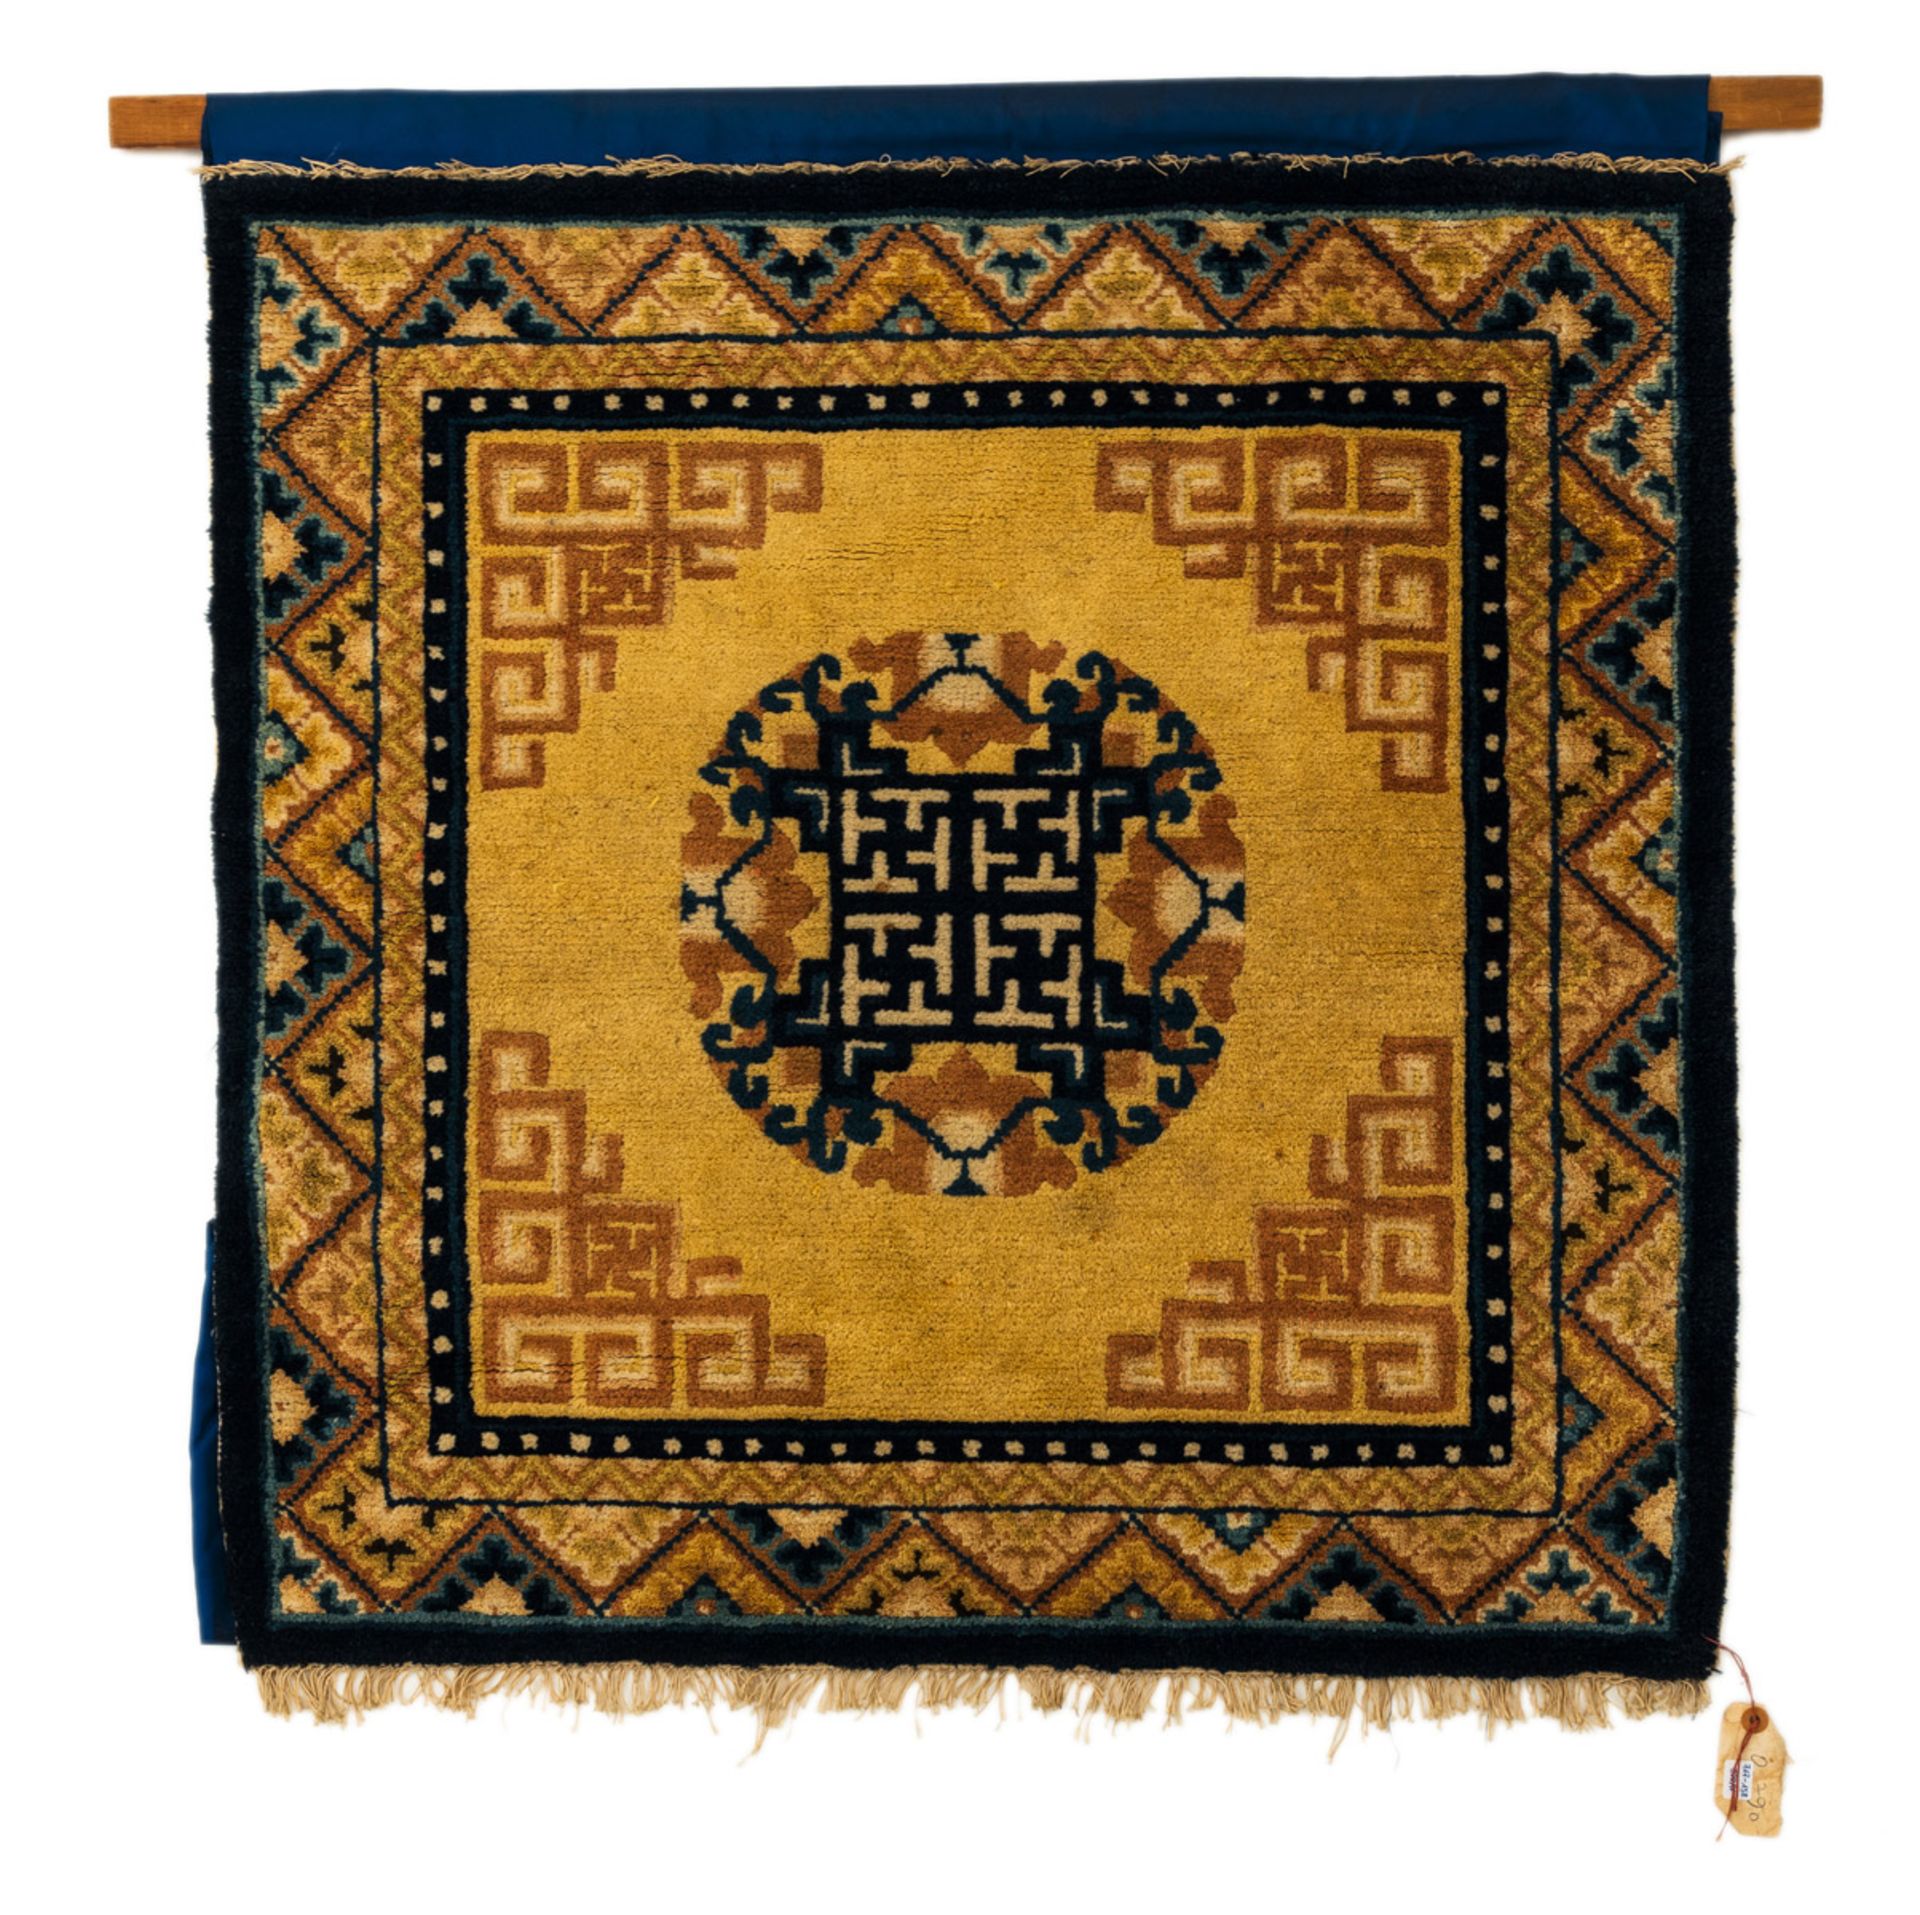 COLORED WOOL SEAT CARPET WITH A MEDALLION AND GEOMETRIC PATTERNS ON A YELLOW BACKGROUND